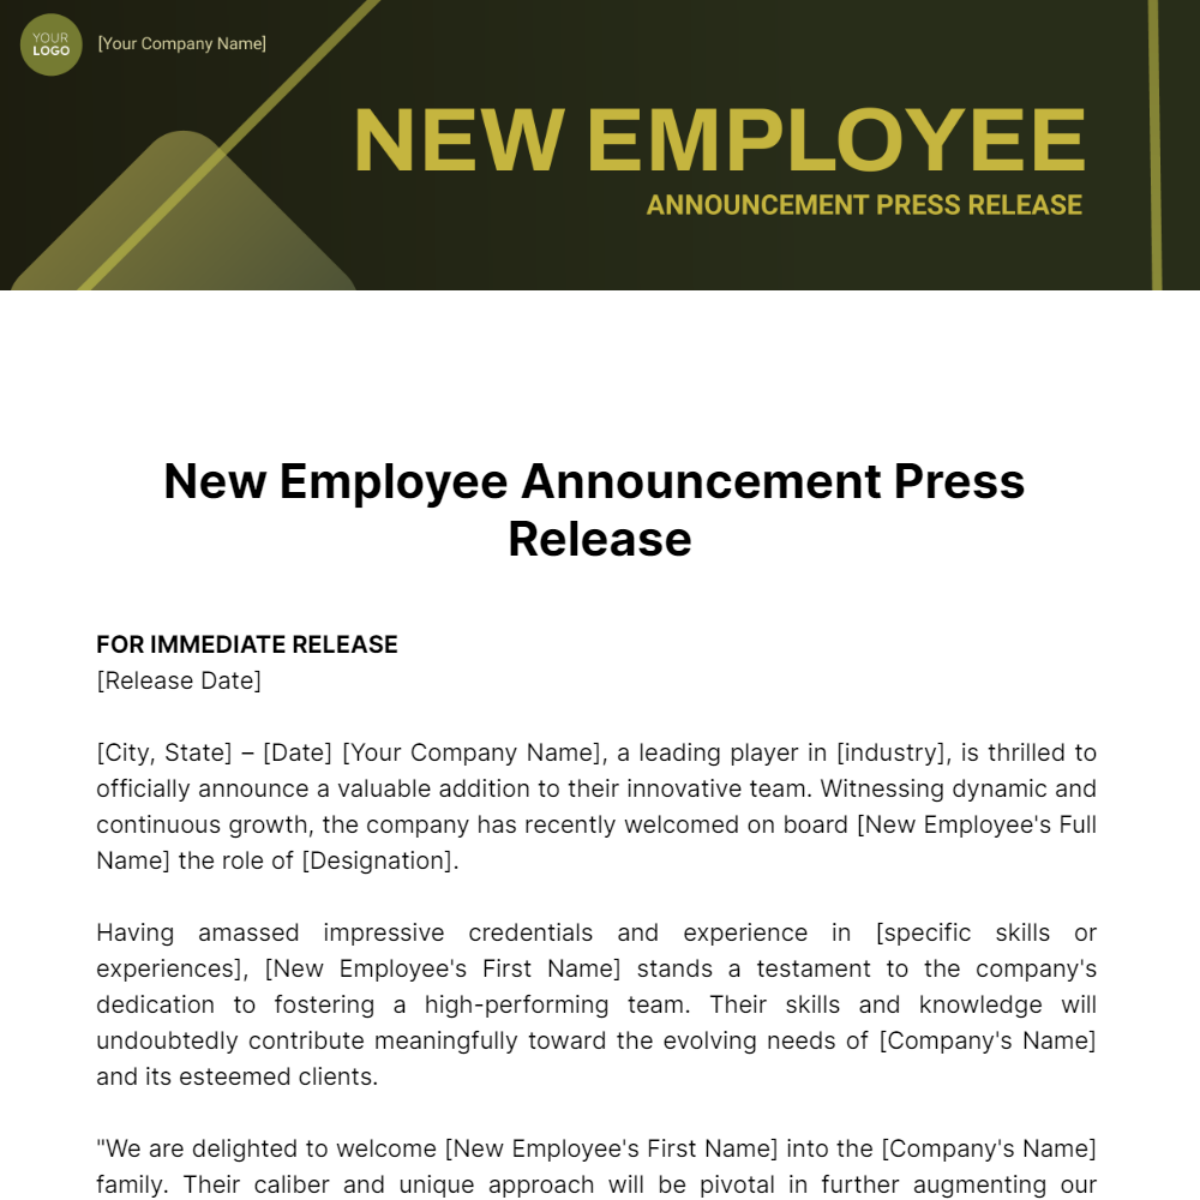 New Employee Announcement Press Release Template